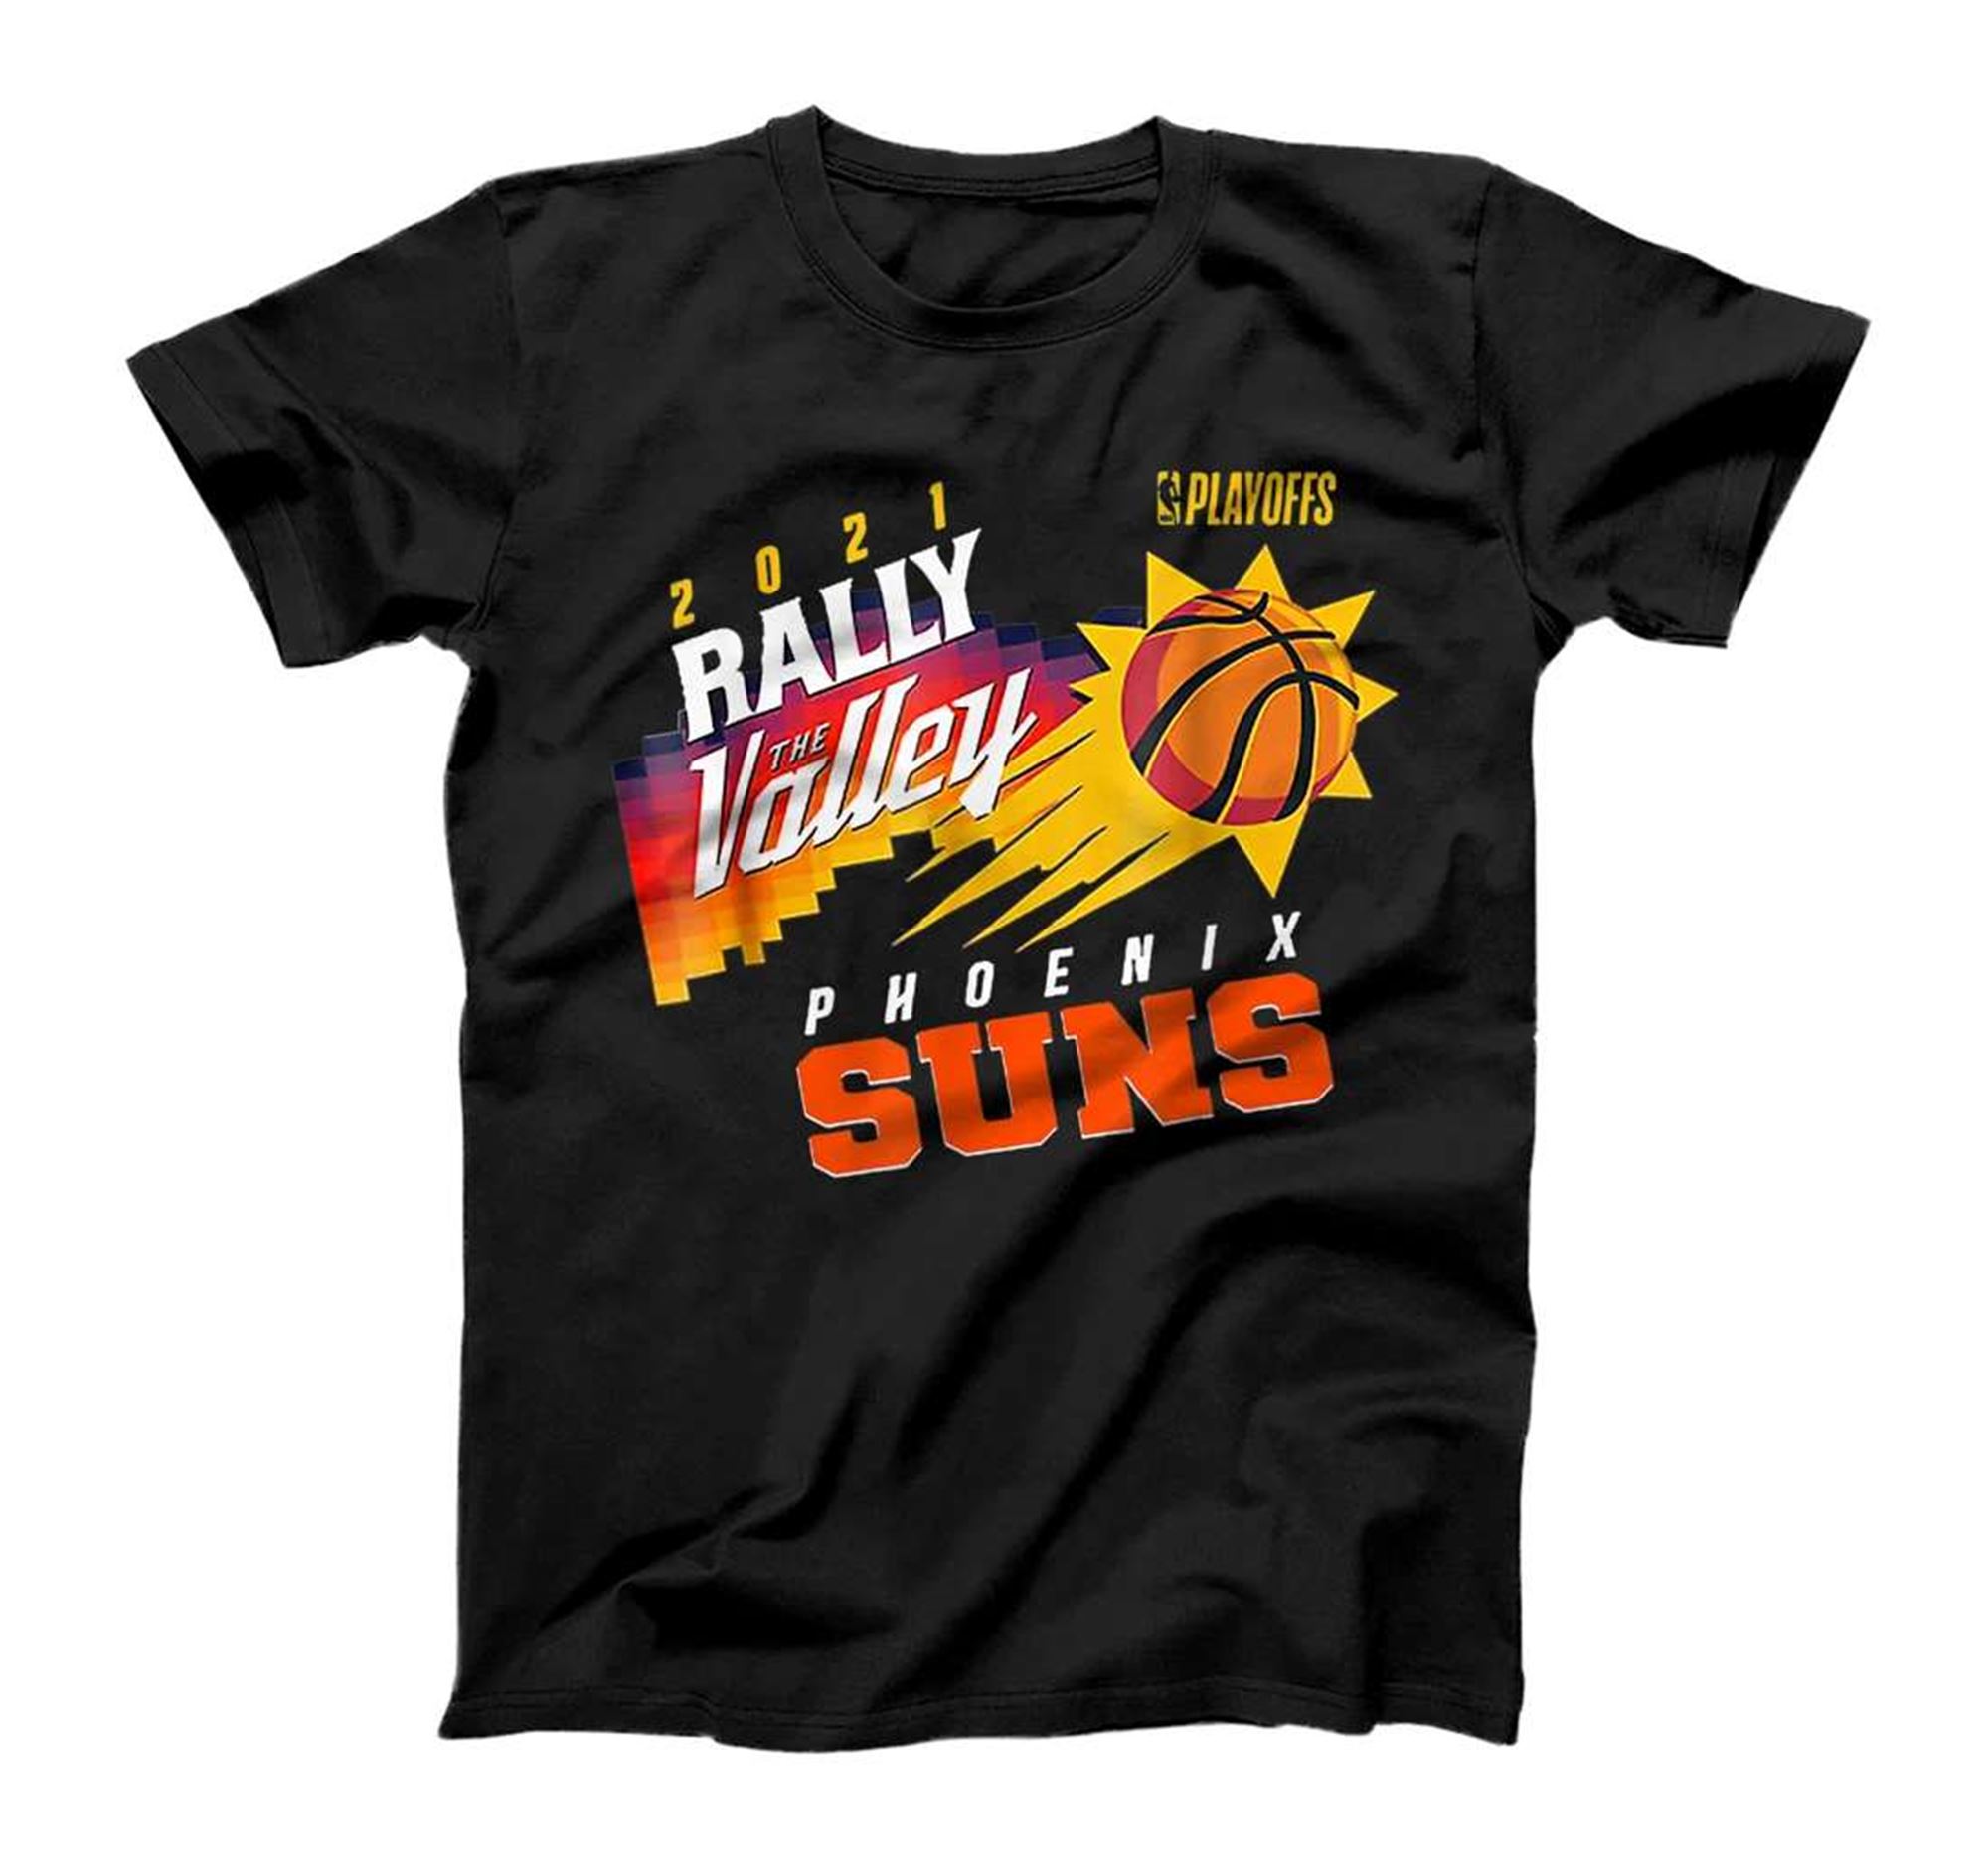 Phoenixs 2021 Suns Playoffs Rally The Valley City Jersey T Shirt Plus Size Up To 5xl